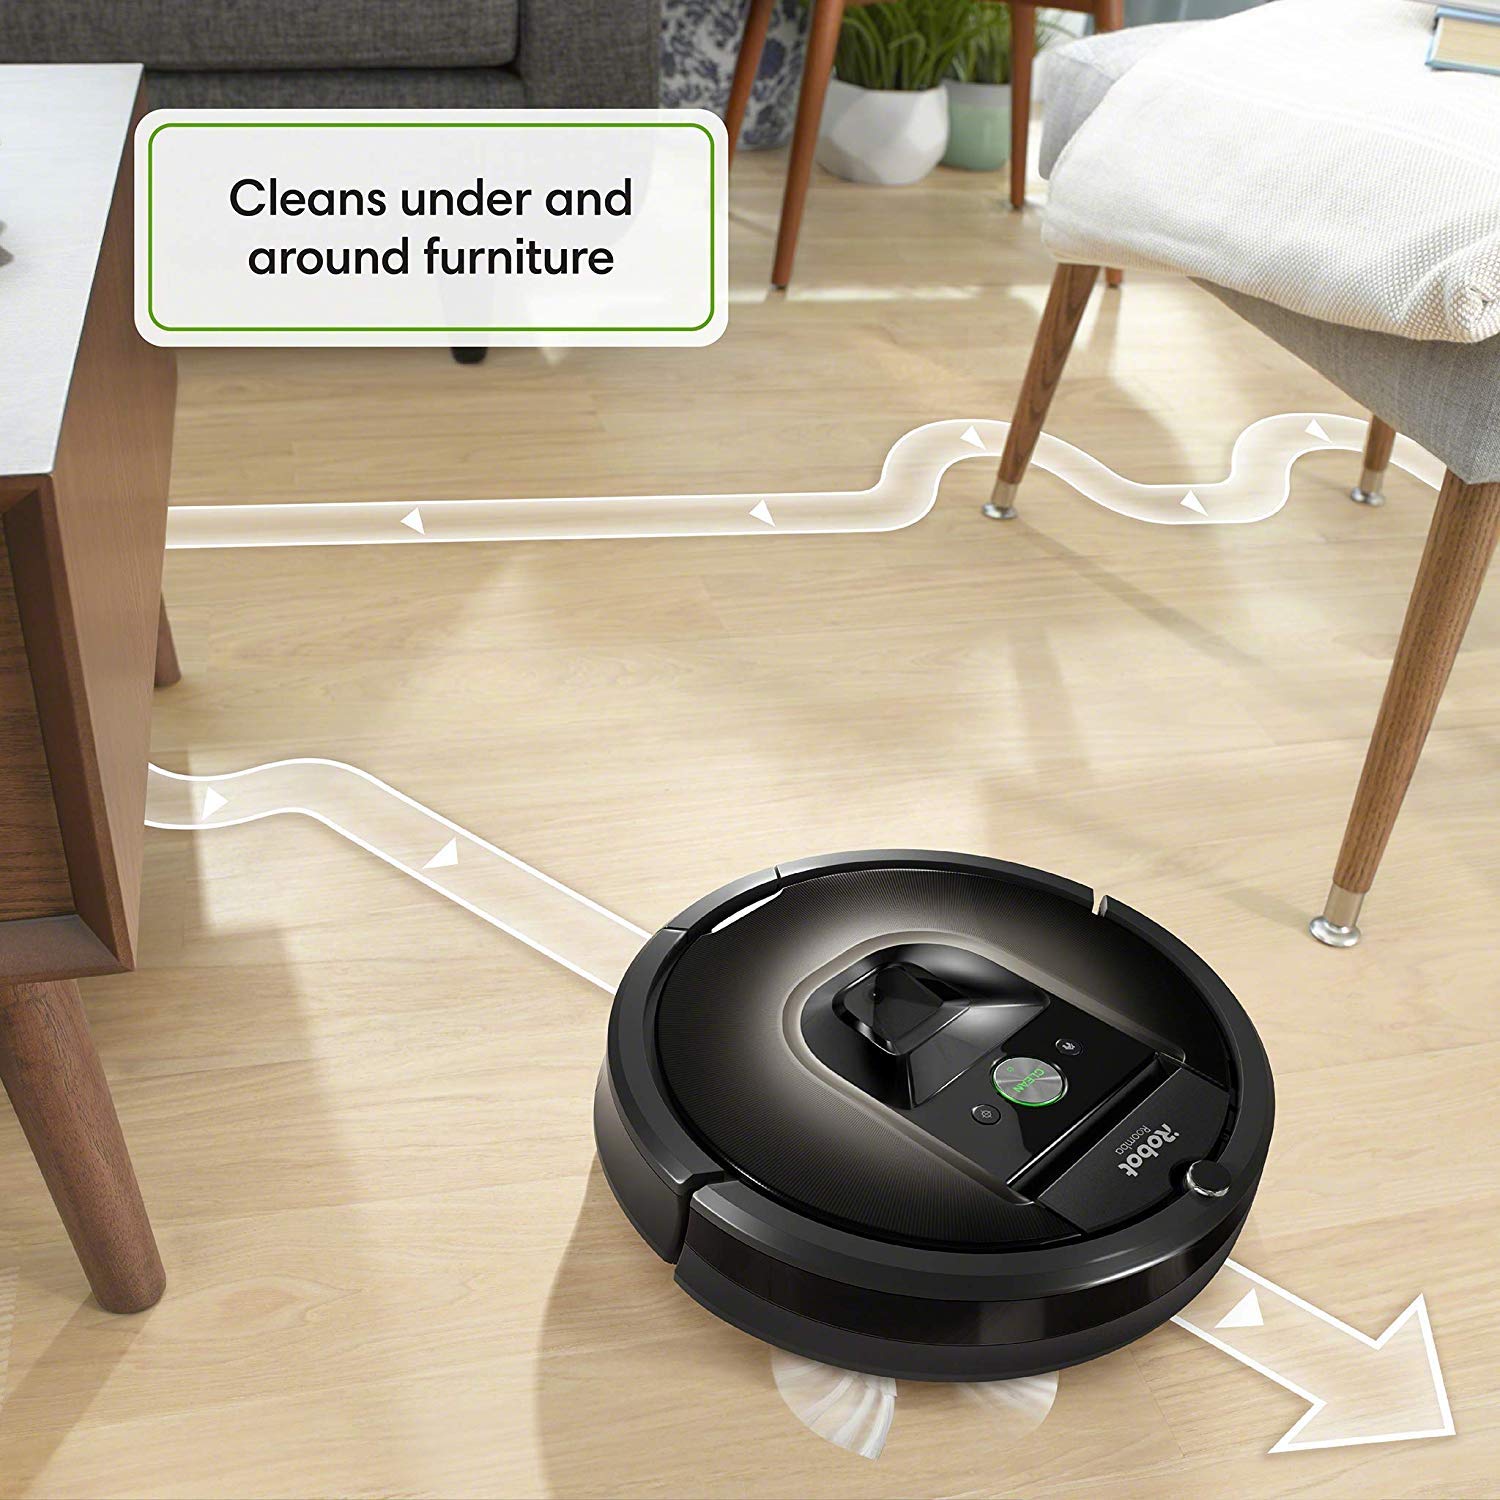 iRobot Roomba 980 Robot Vacuum-Wi-Fi Connected Mapping, Works with Alexa, Ideal for Pet Hair, Carpets, Hard Floors, Power Boost Technology, Black (Renewed)